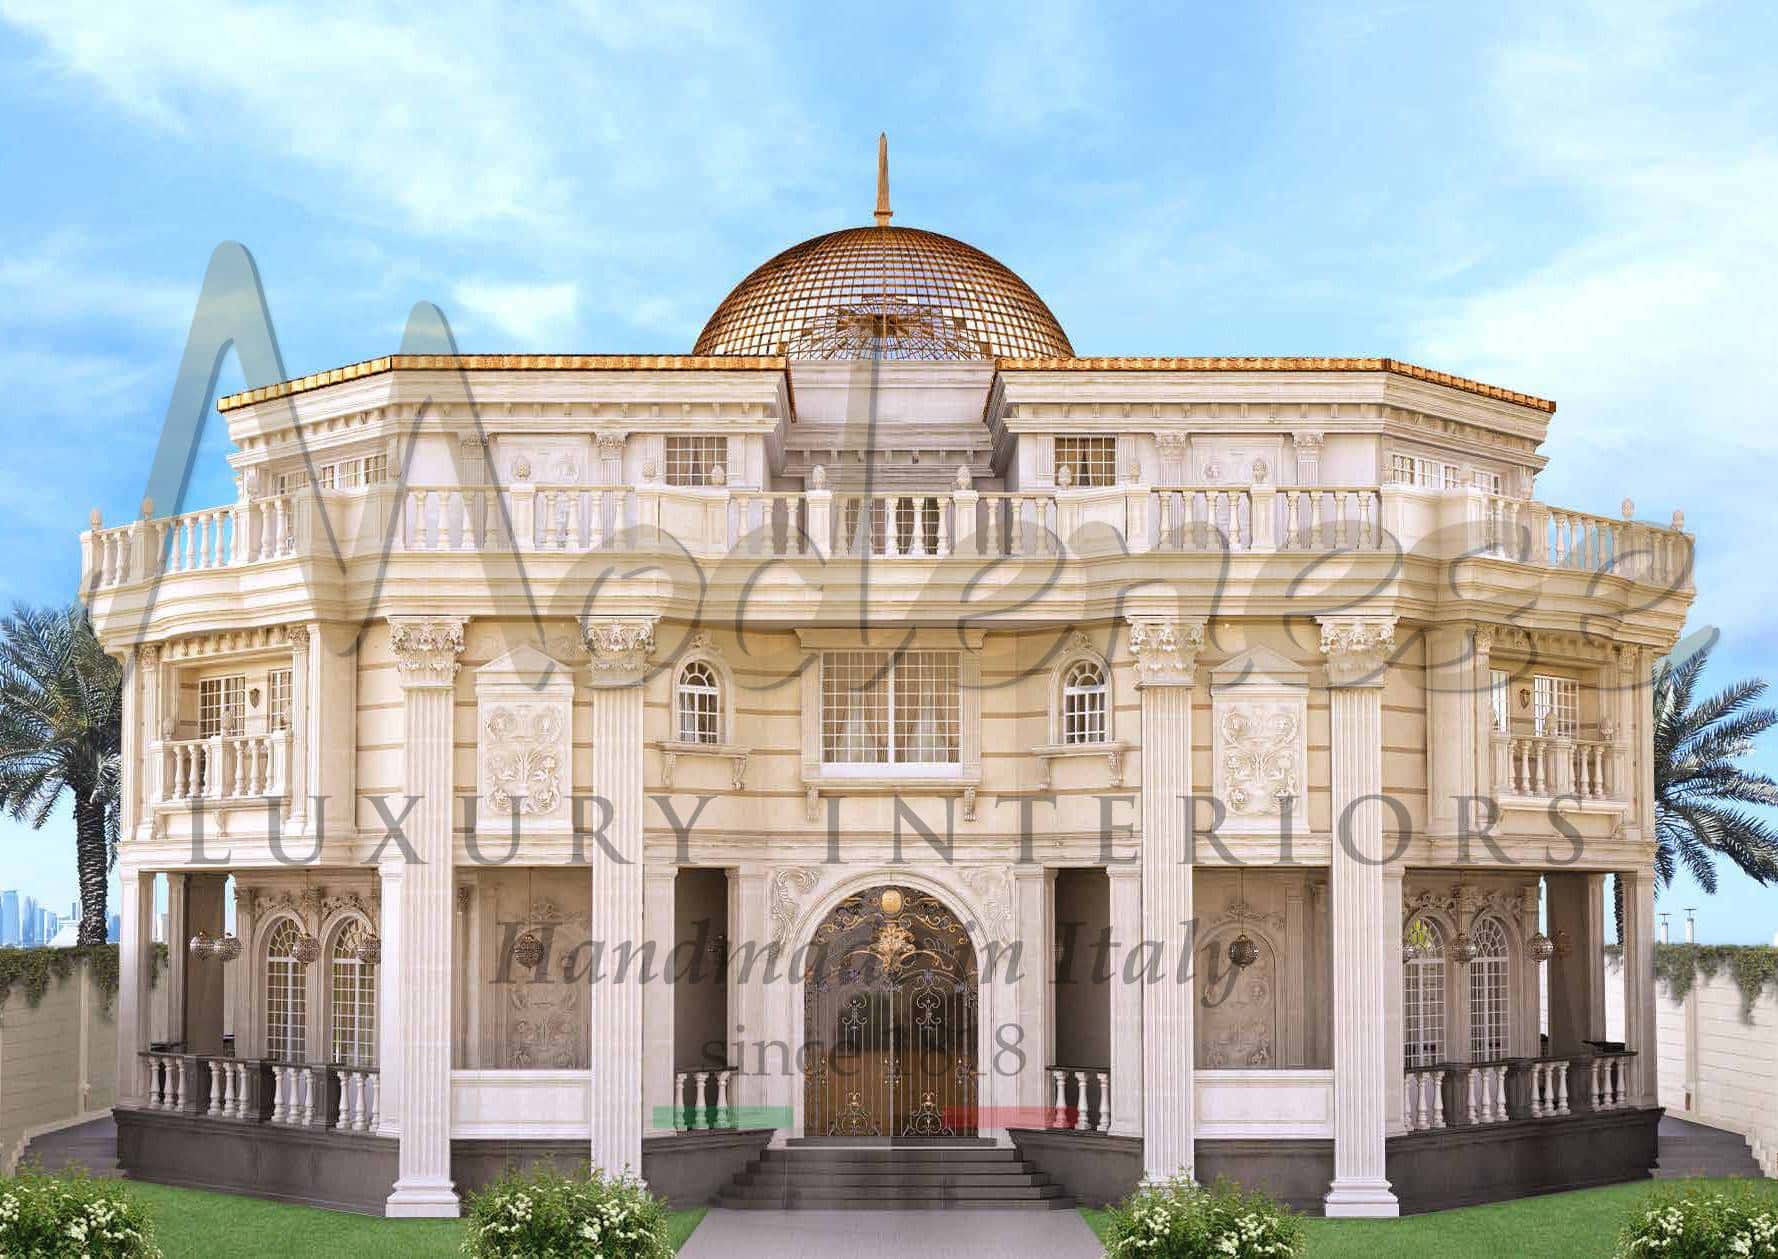 customized project realization mansion penthouse design luxury classic classy royal baroque victorian majestic handcrafted solid wood gold opulent fabric italian high-end best quality golden details accessories traditional baroque mansions and penthouse royal bespoke decorations and furniture